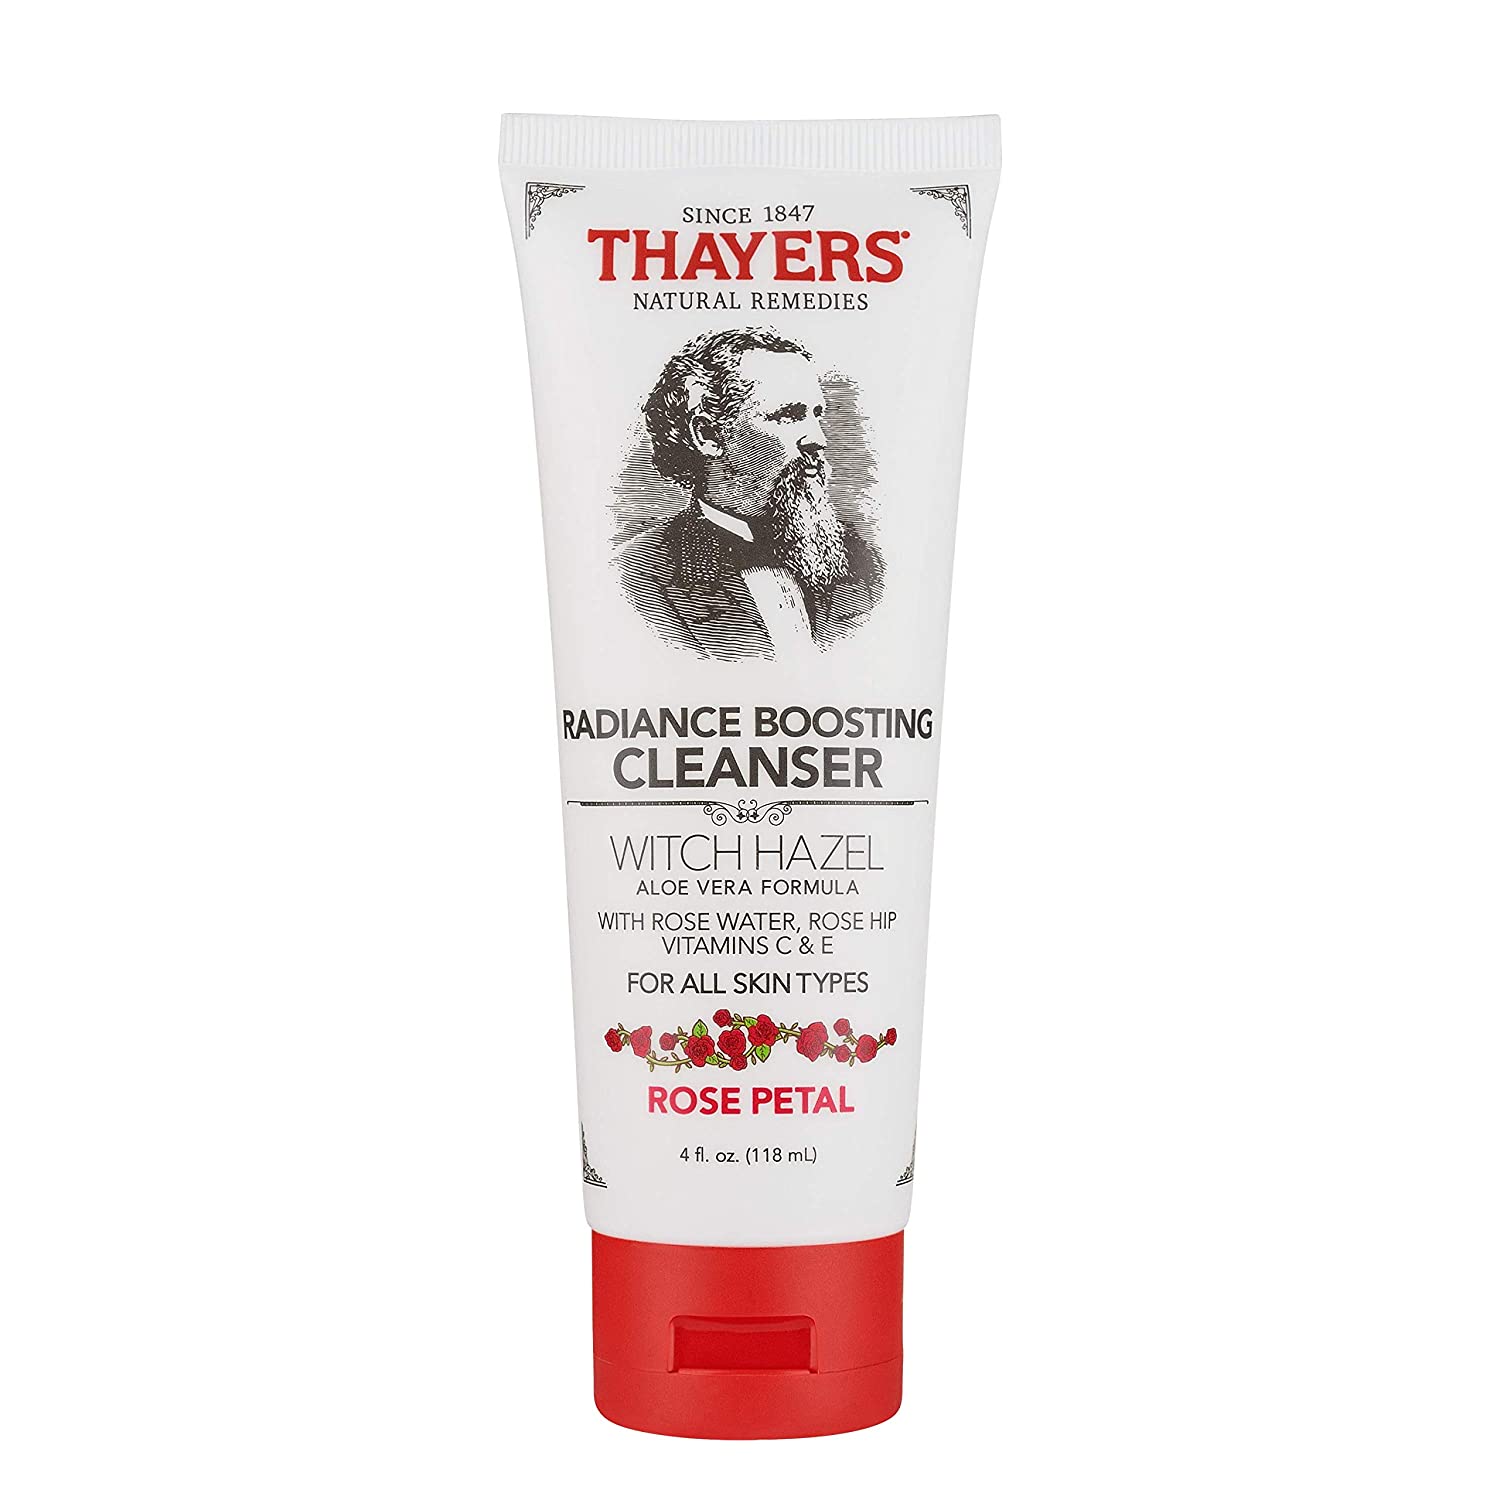 4-Oz Thayers Rose Petal Radiance Boosting Cleanser $5.50 + Free Shipping w/ Amazon Prime or Orders $25+